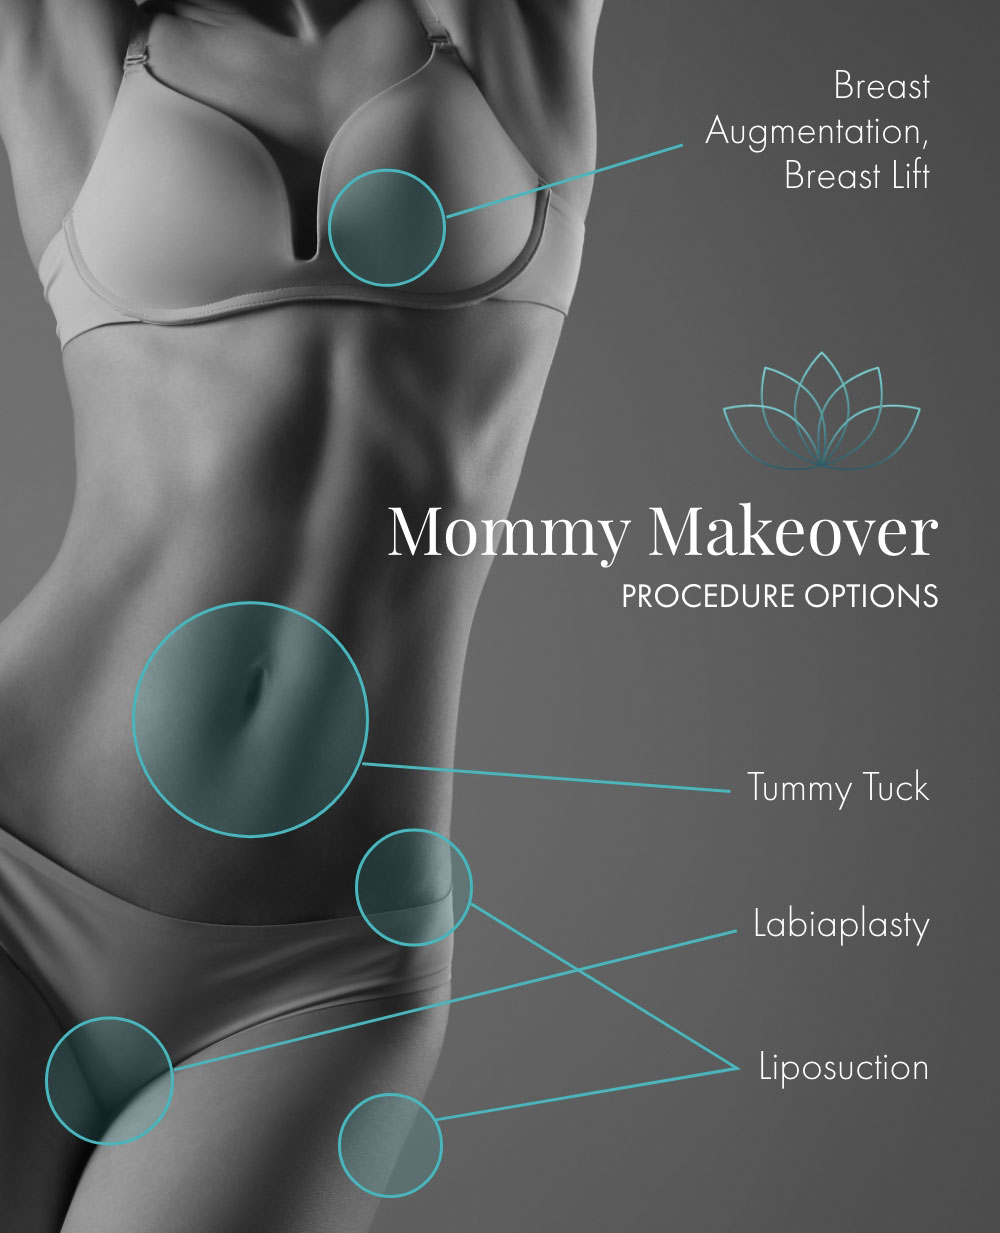 Common Mommy Makeover Procedures with Treatment Areas.